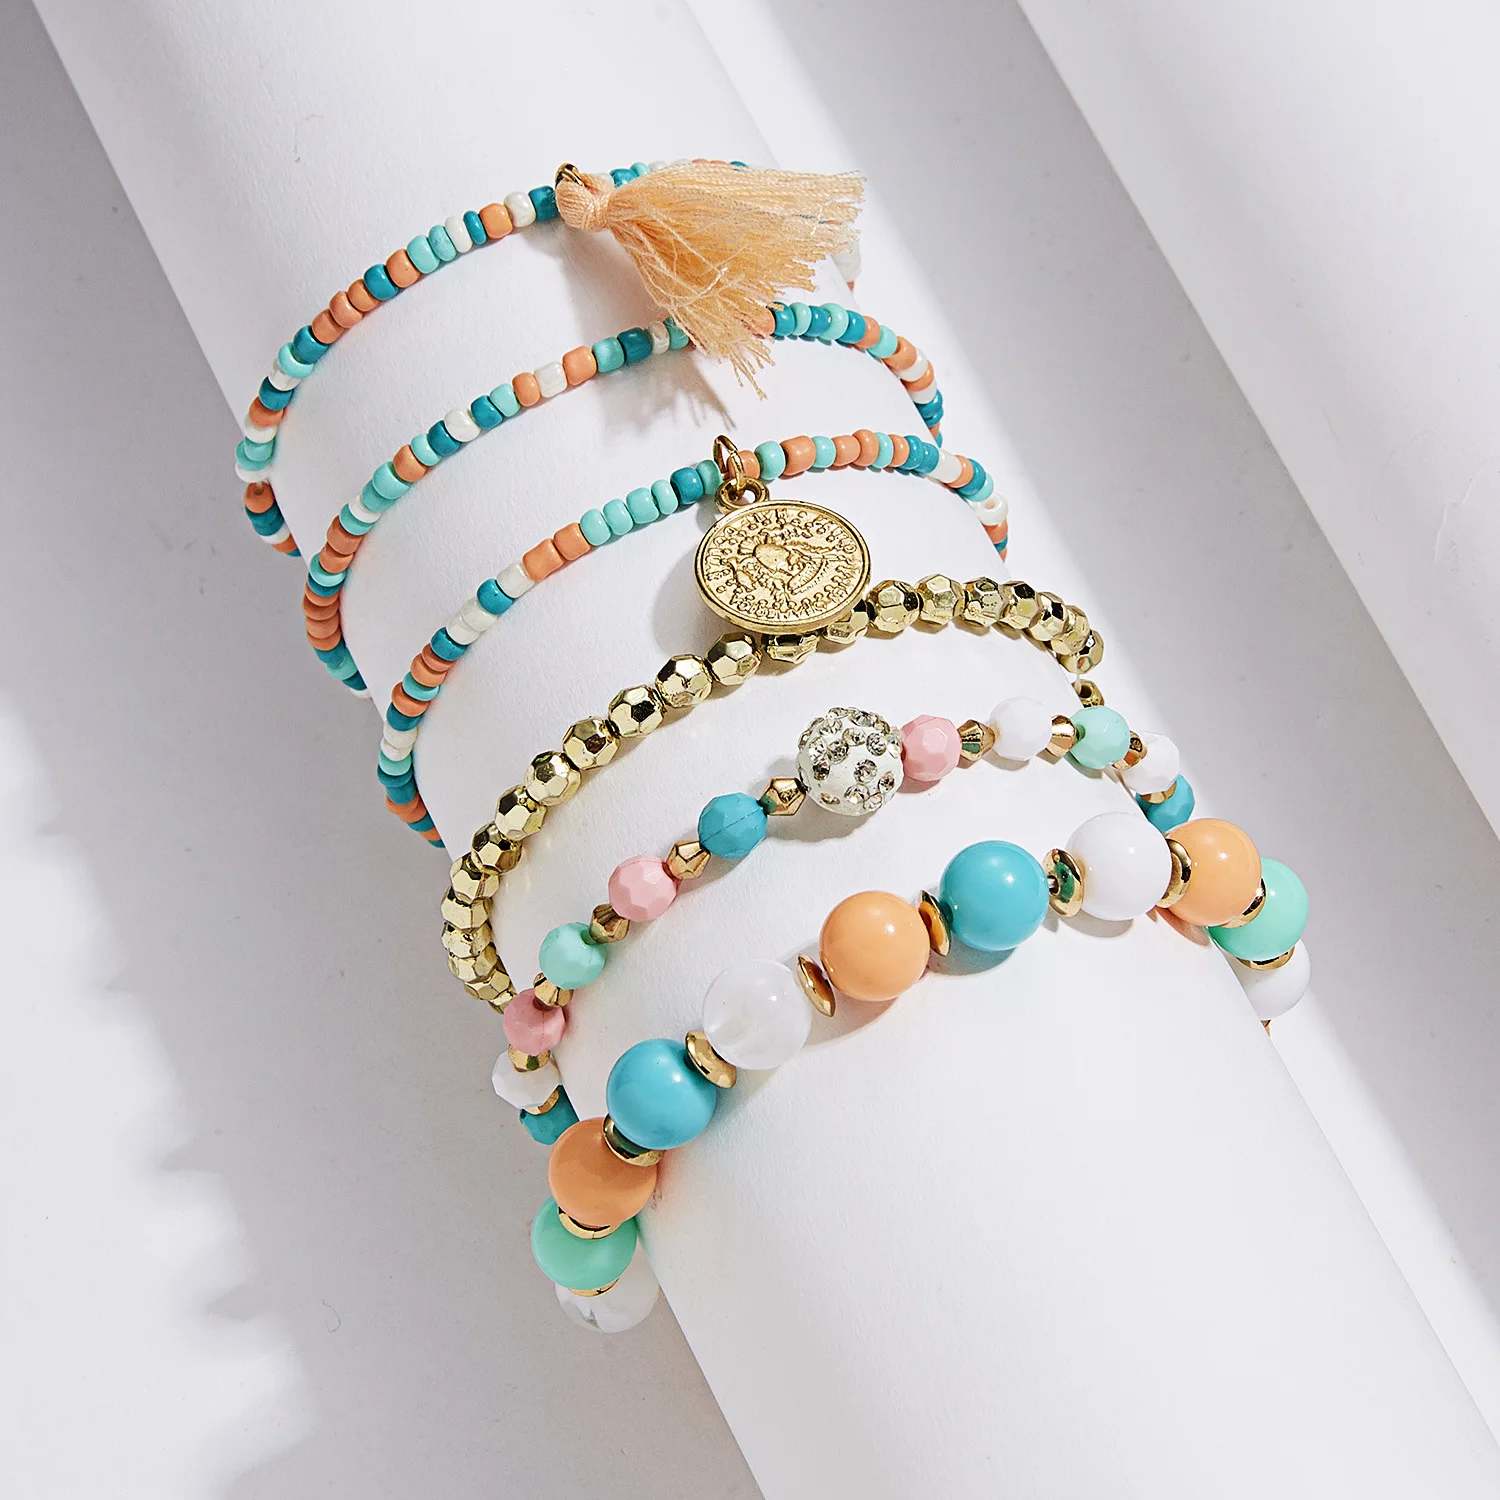 Jewelry Of The Week – Earthy/Bohemian Bracelet and Necklace Set